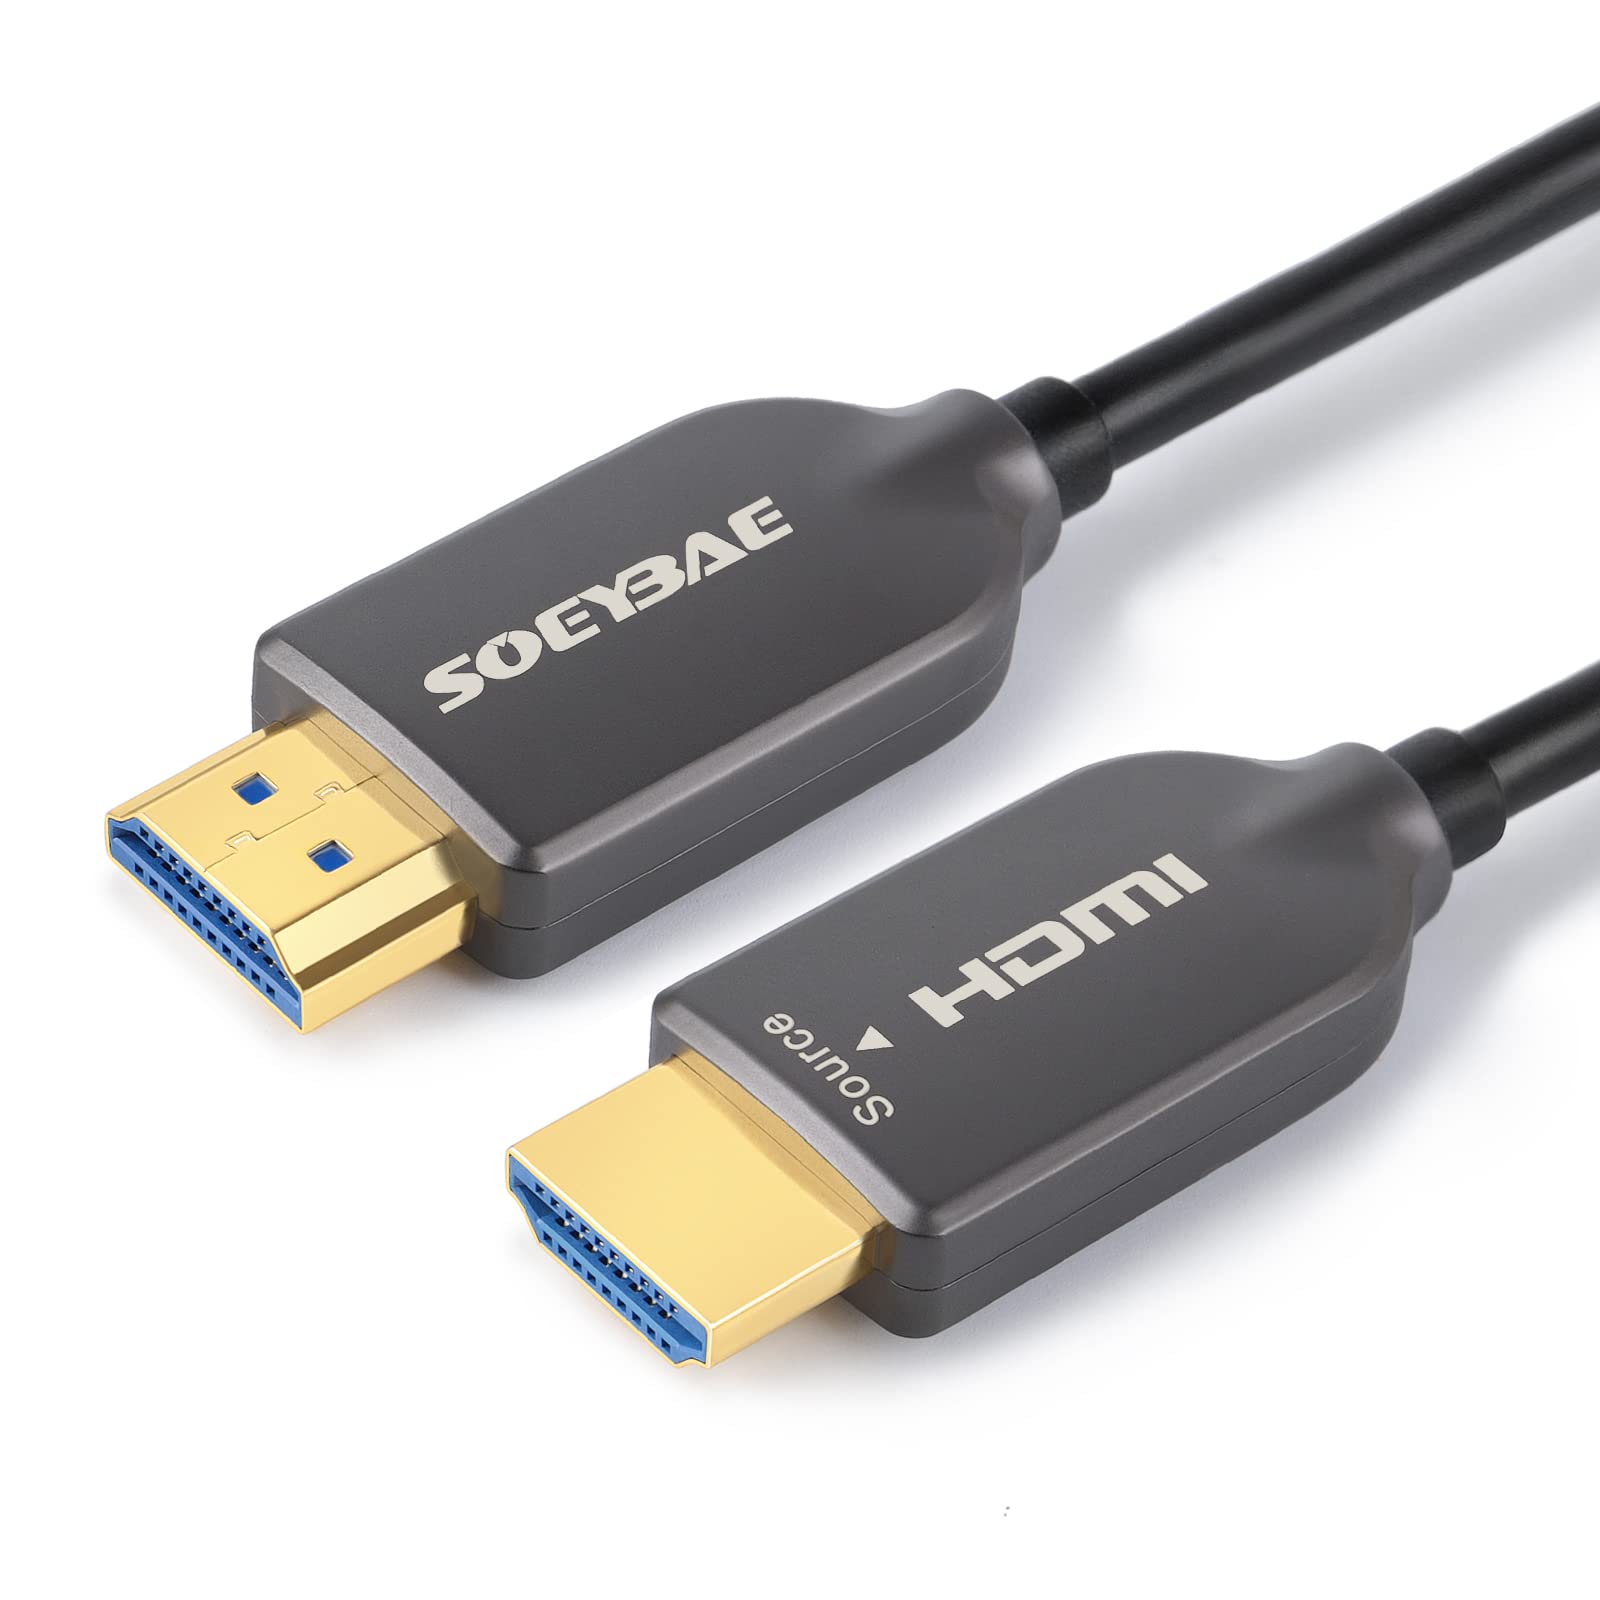 SOEYBAE 4K Fiber Optic HDMI Cable 50ft/15m HDMI Cable 2.0 Supports 4K@60Hz, 18Gbps, 4:4:4, ARC, 3D, for TV LCD Laptop PS3 PS4